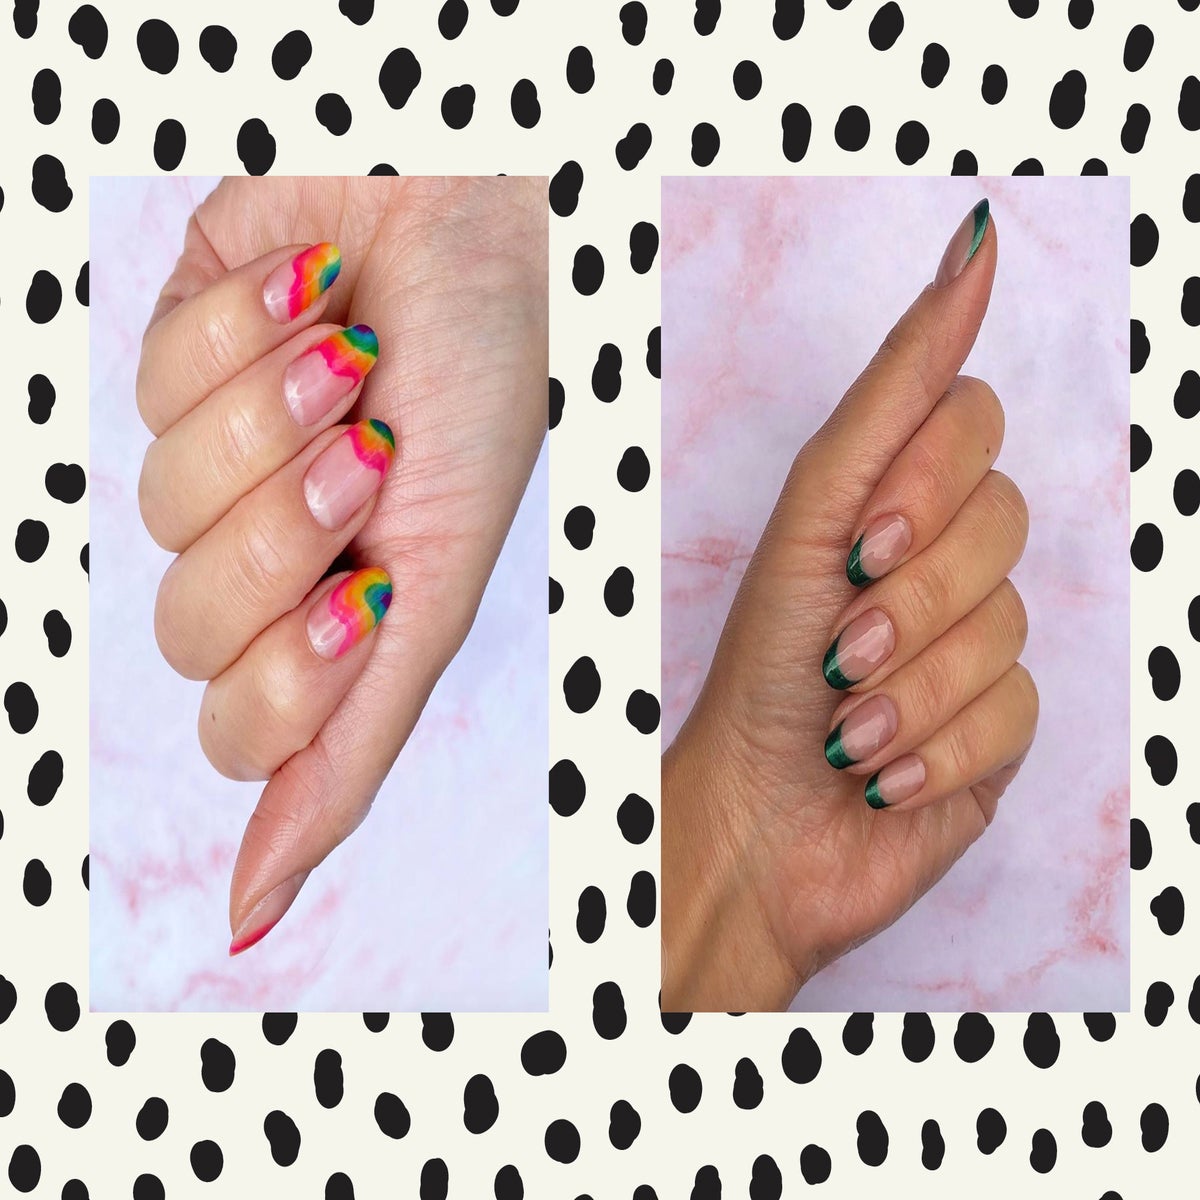 https://static.independent.co.uk/s3fs-public/thumbnails/image/2020/05/04/16/nail-art-trends-indybest.jpg?width=1200&height=1200&fit=crop